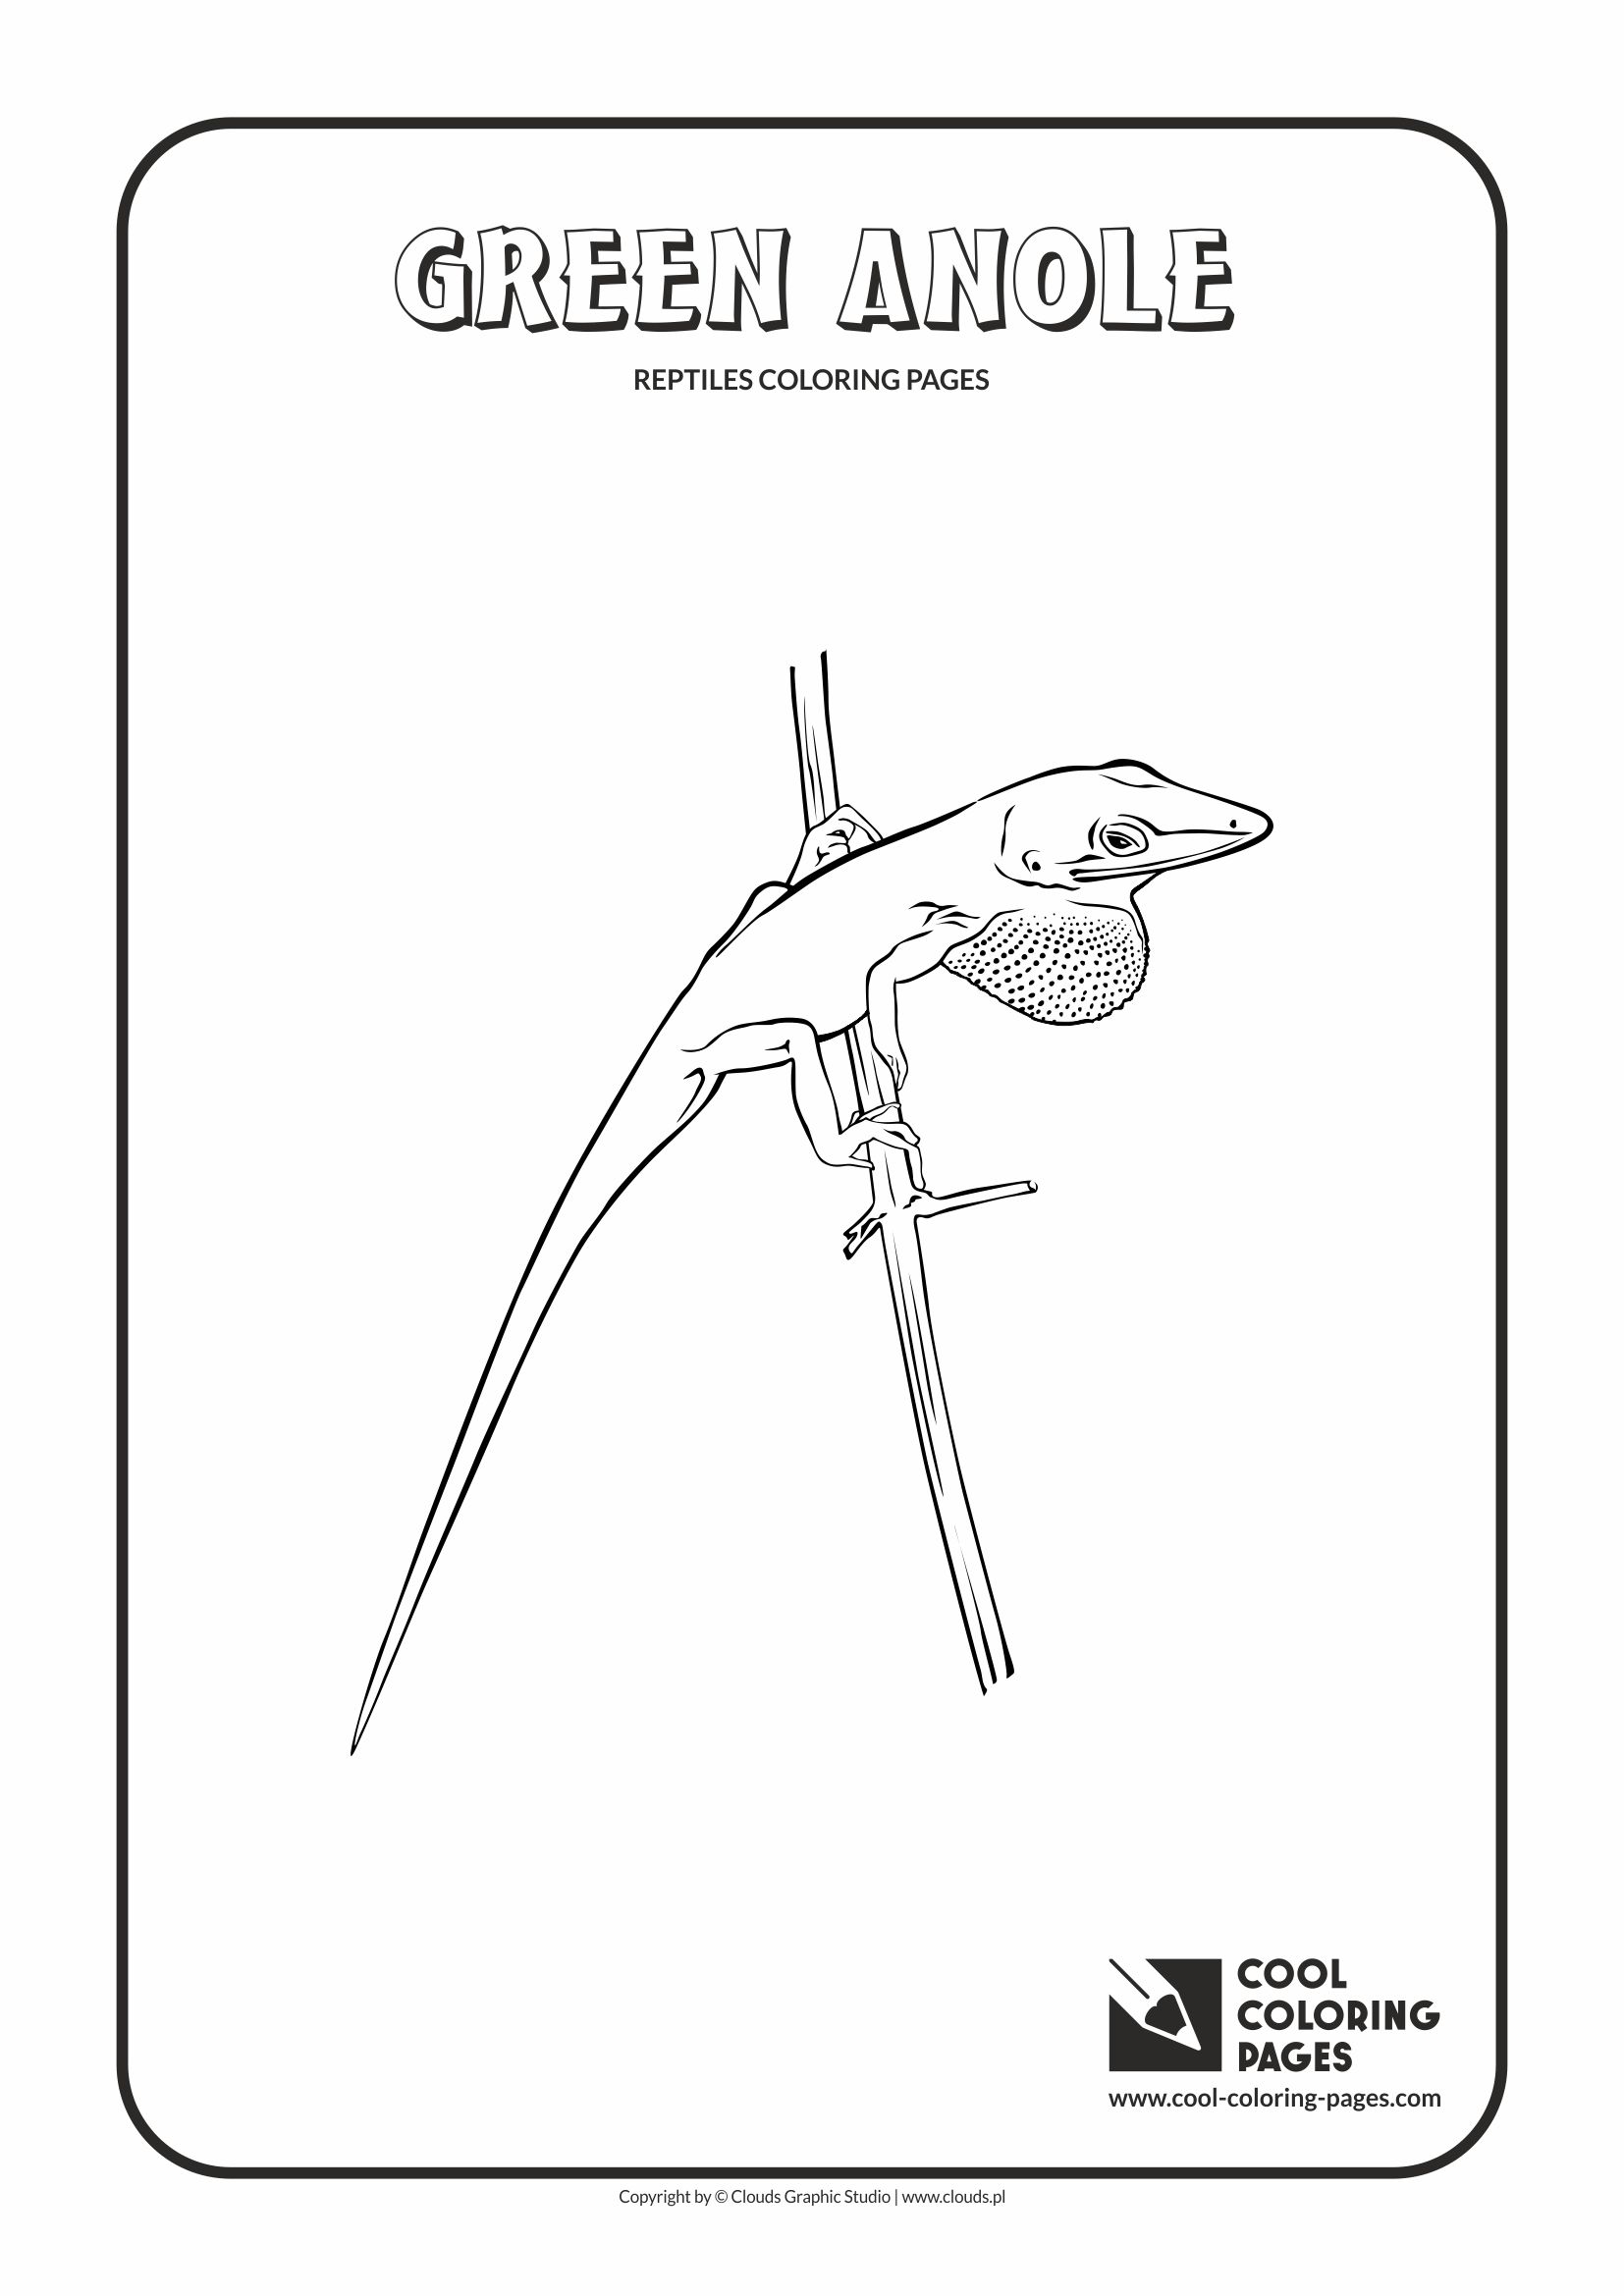 Cool Coloring Pages - Animals / Green anole / Coloring page with green anole